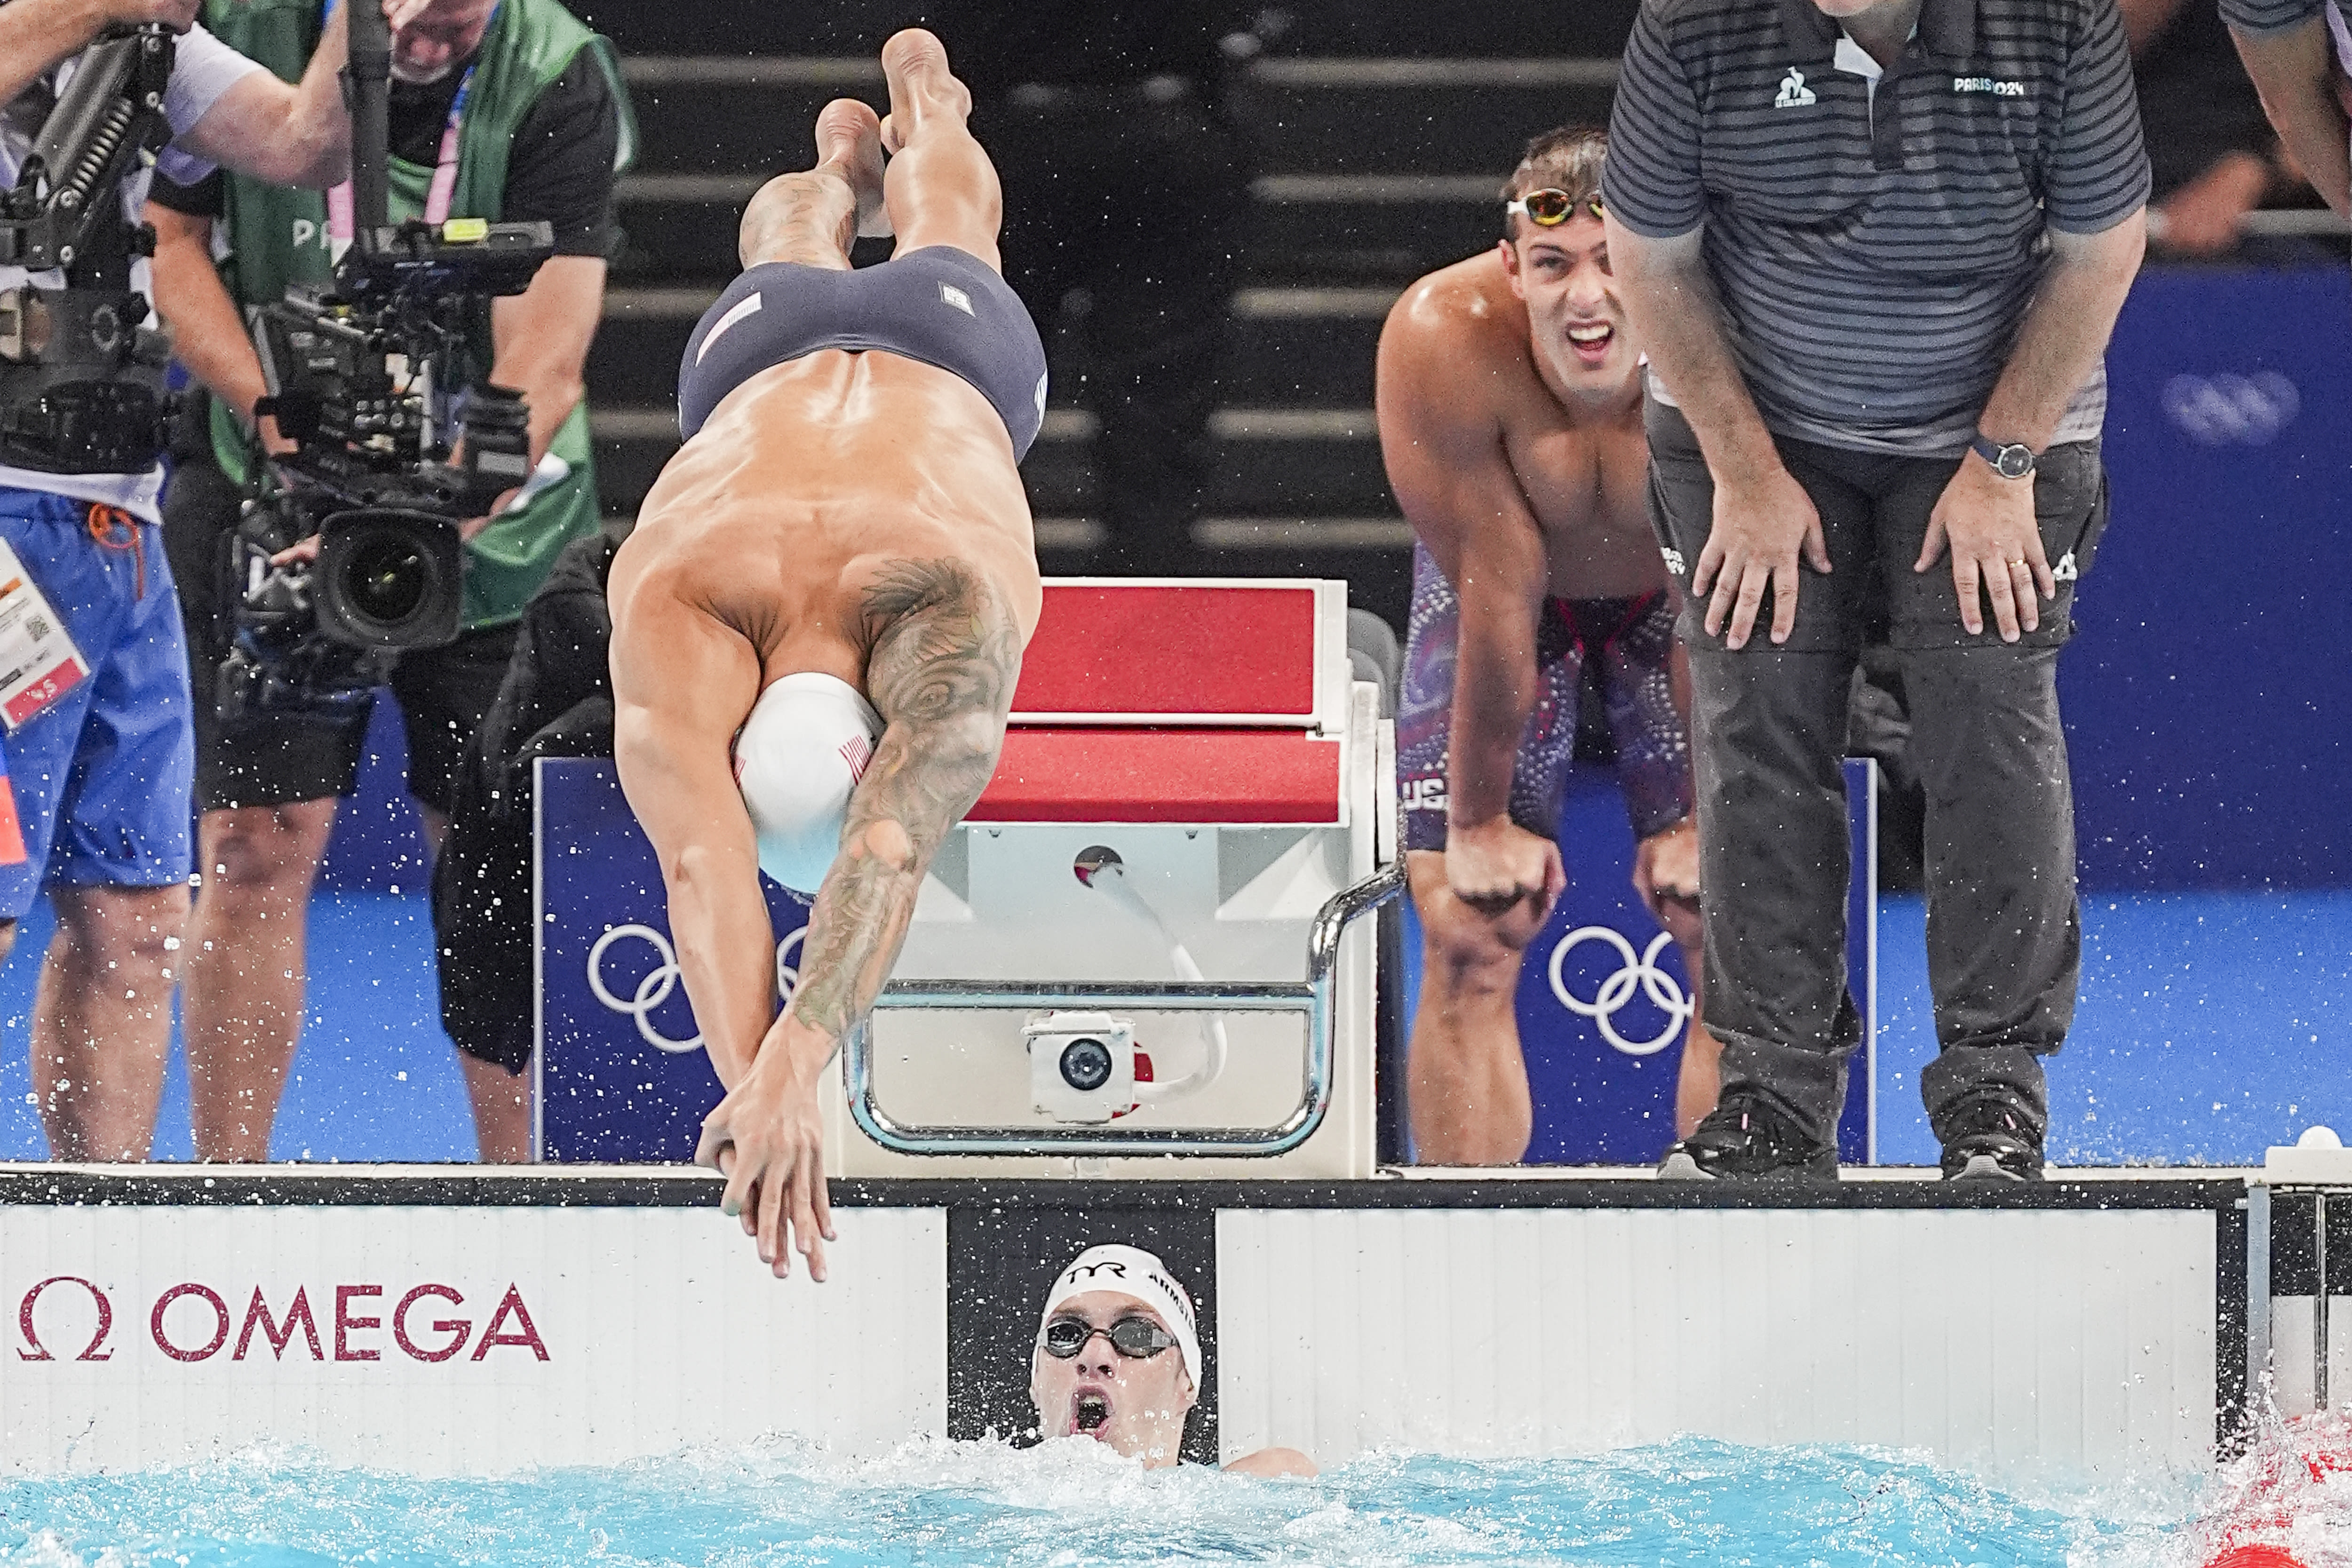 U.S. swimmers win Team USA’s first gold medal of 2024 Olympics in men’s 4x100 relay